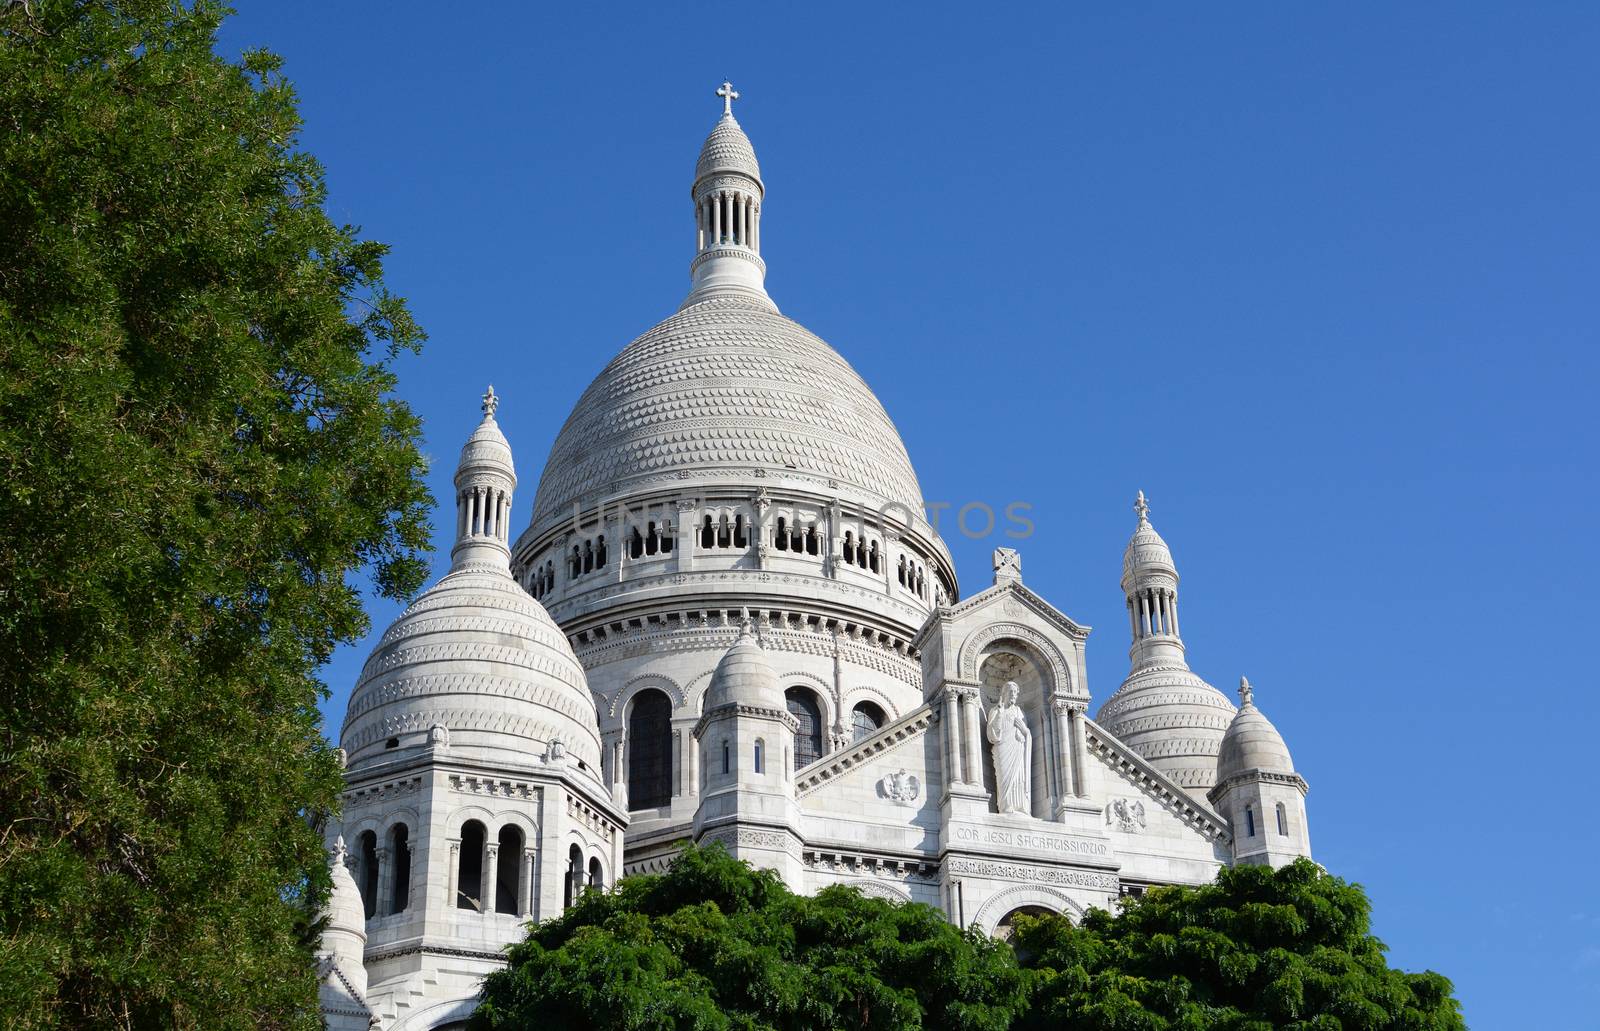 Dome of the Sacre Coeur basilica in Paris rises above trees against a blue sky, showing detailed architecture